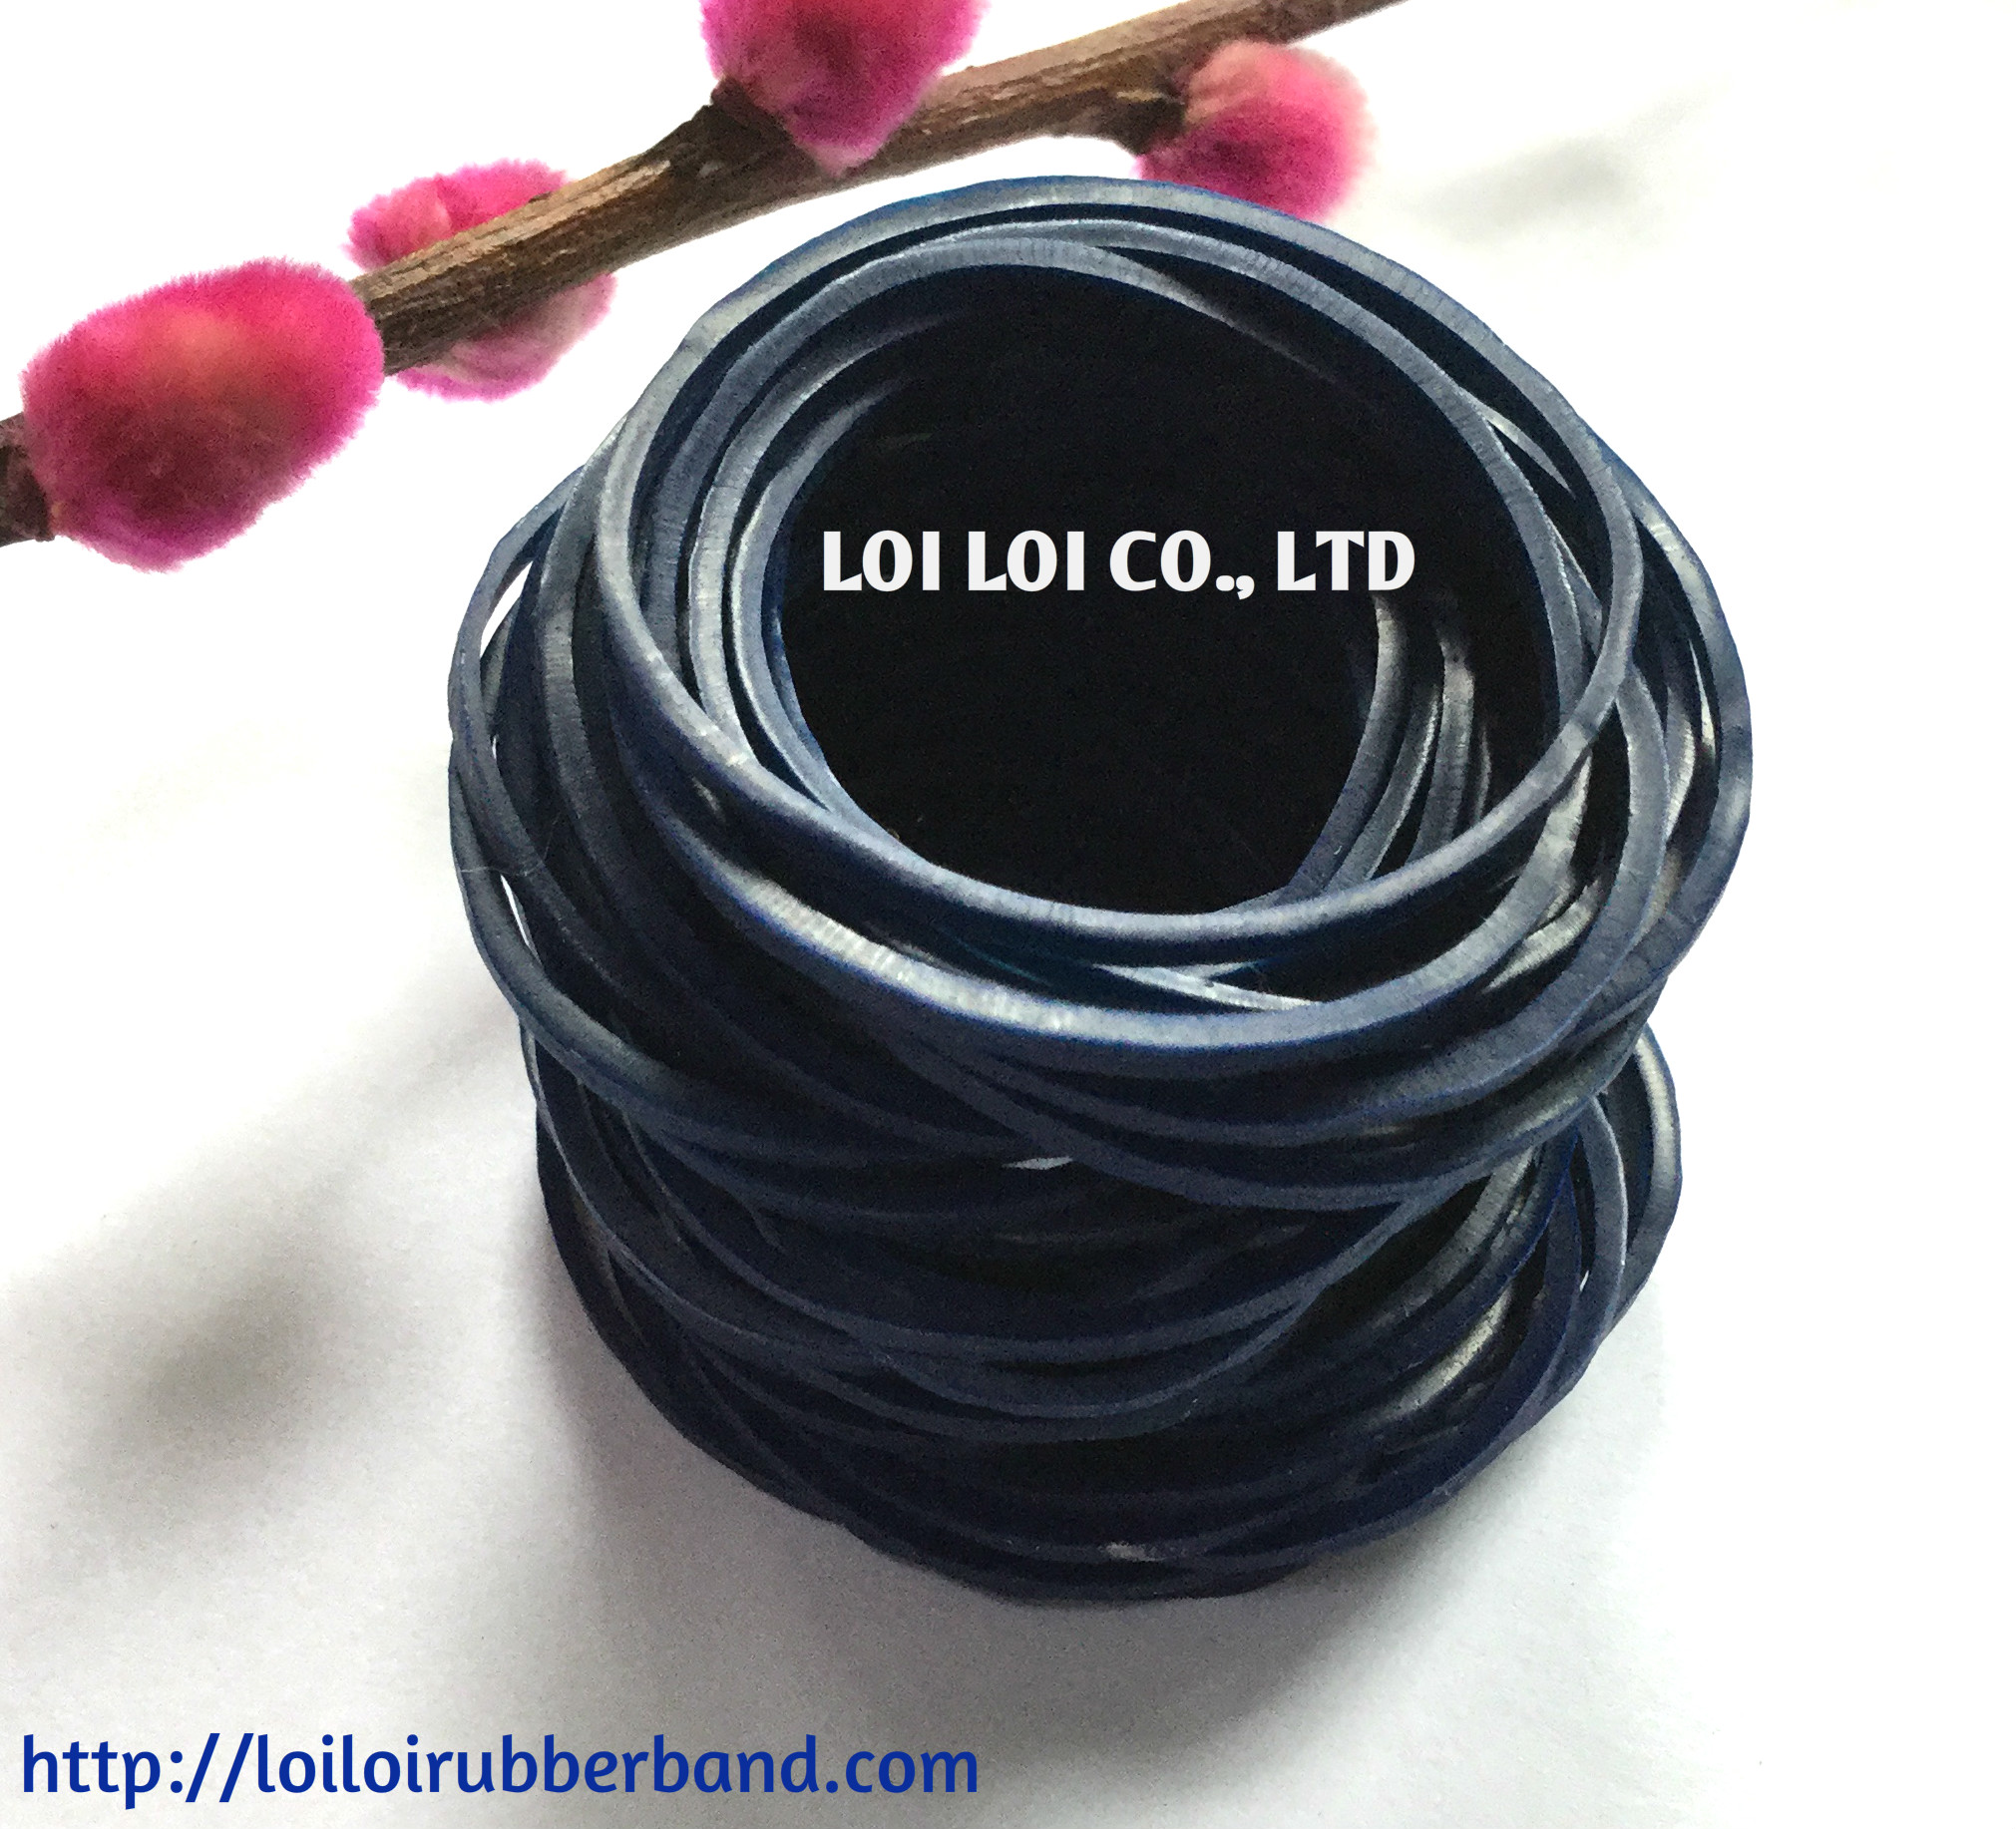 Custom unbreakable Rubber Band flat with Dark color like Blue, Red, Green, Natural... High quality for Money and Any Purposes 